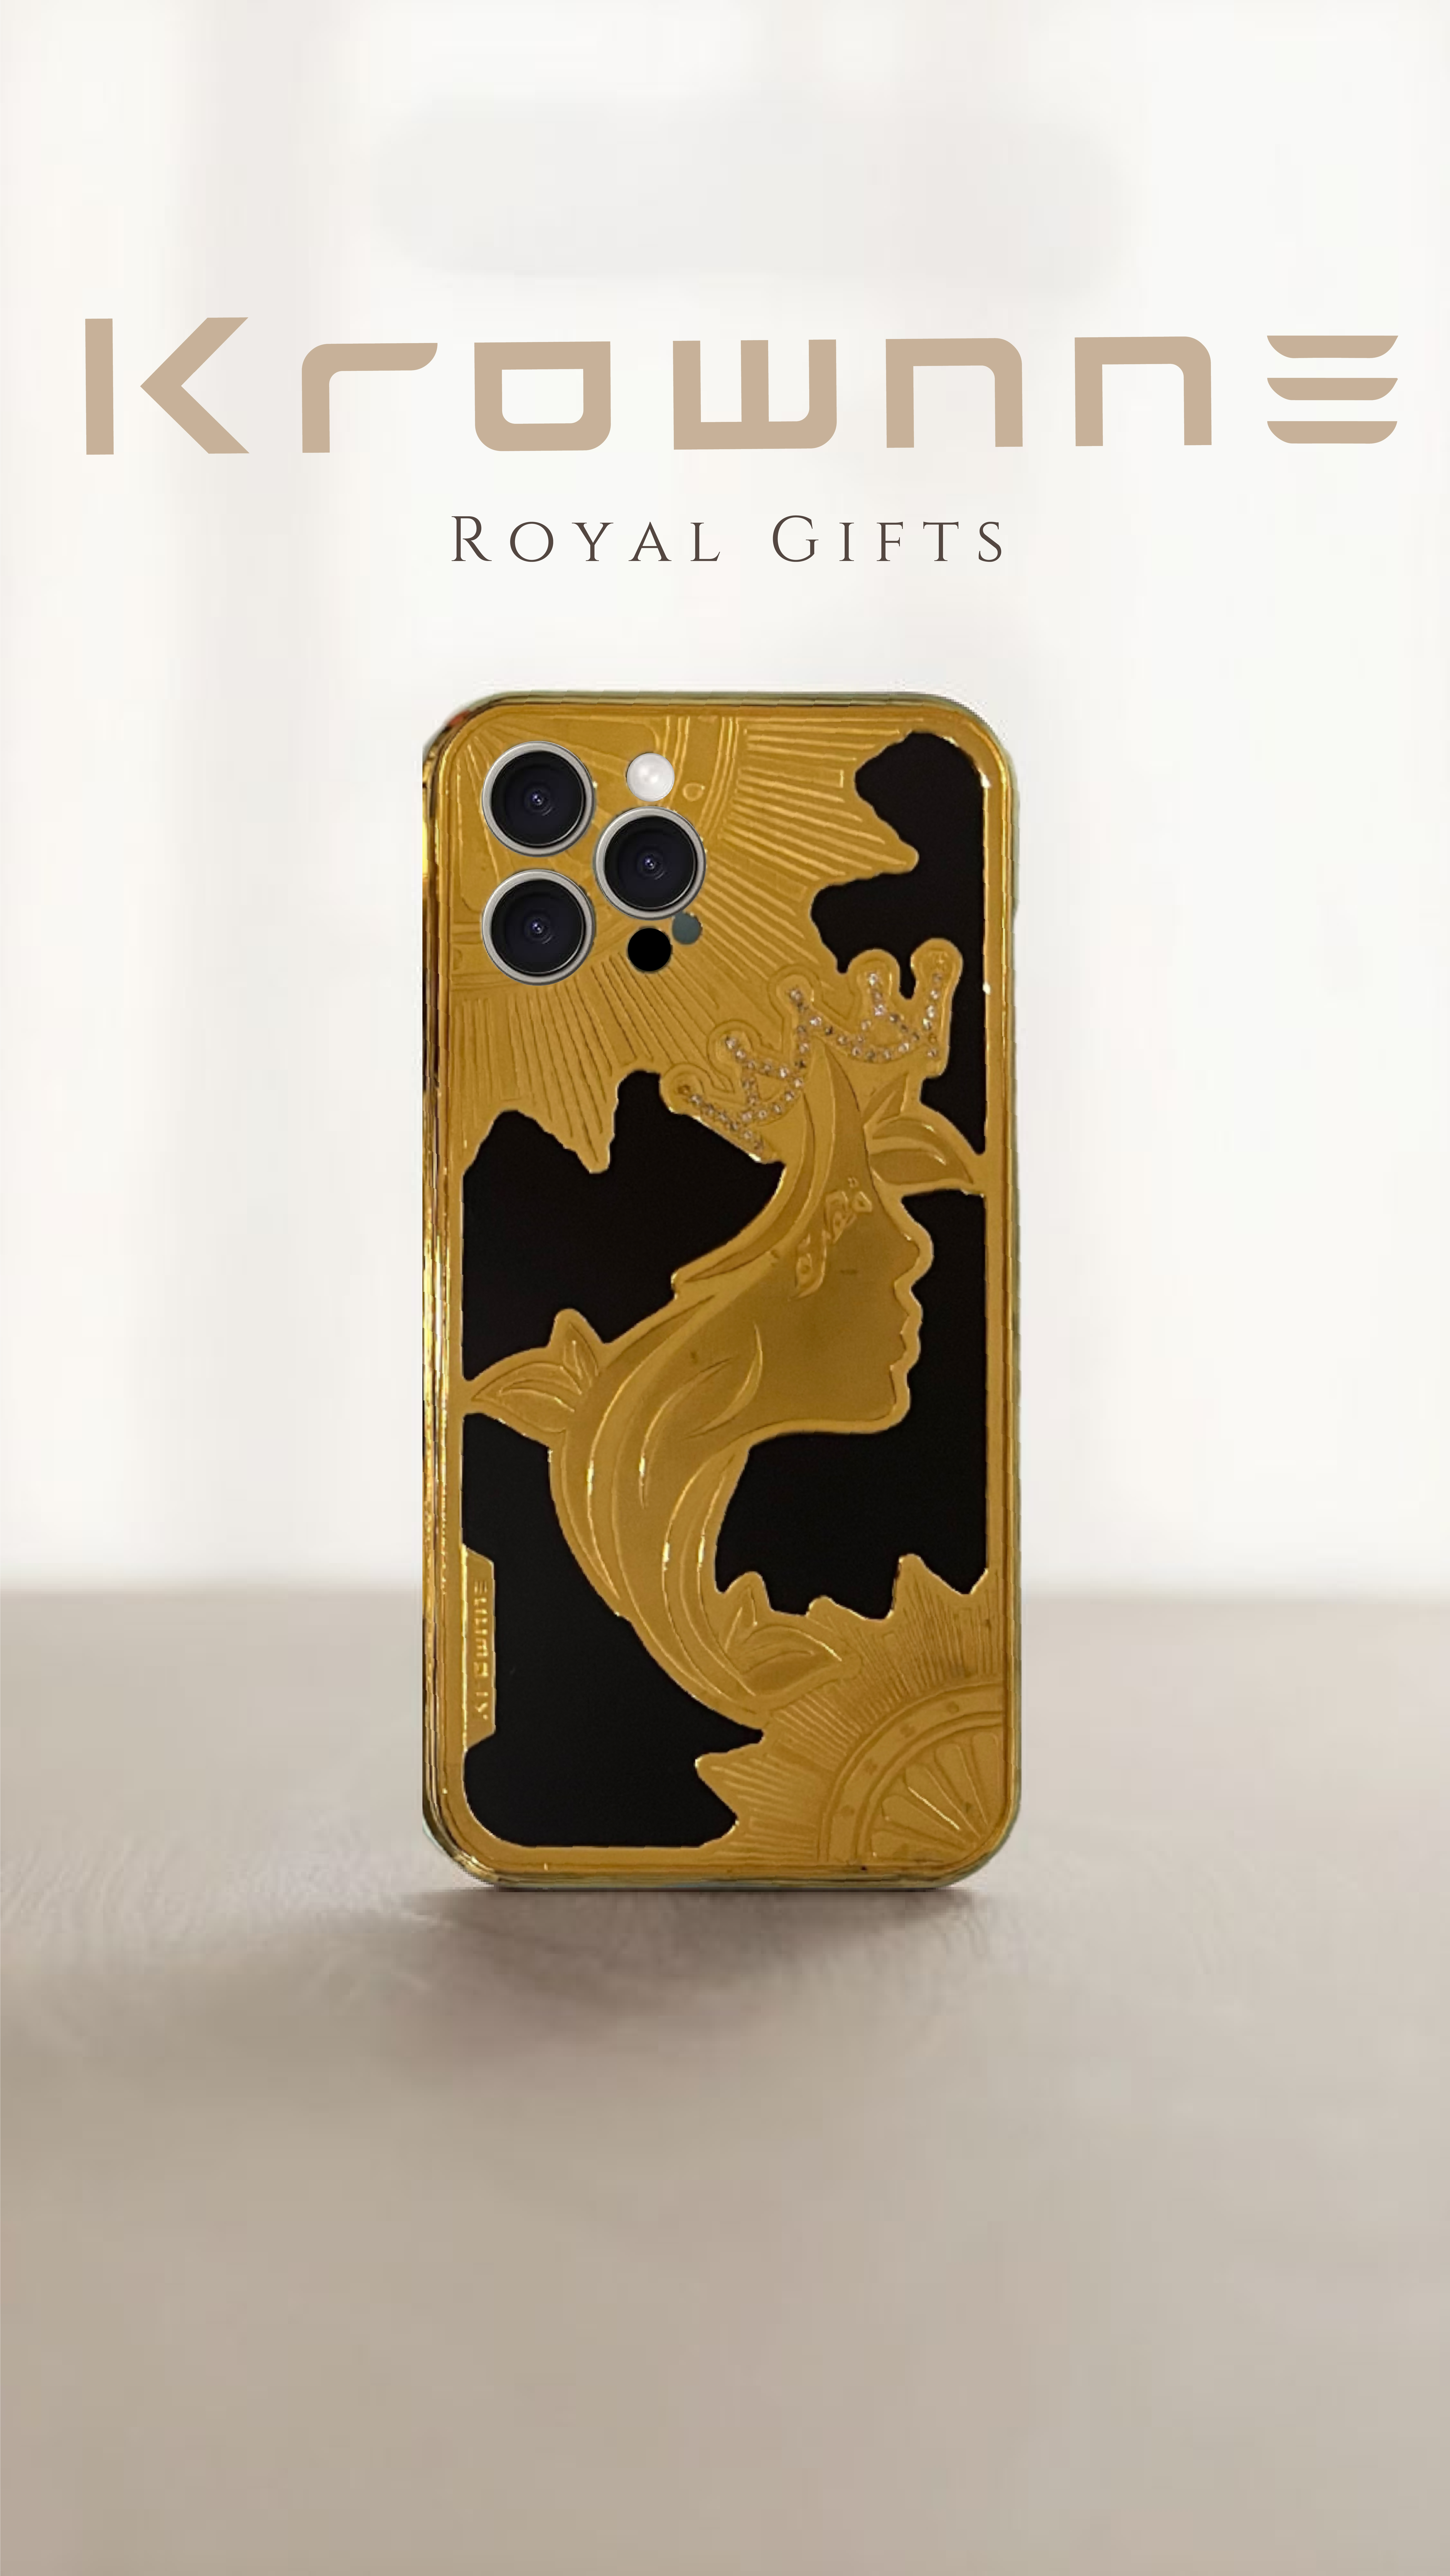 Luxurious custom gold iPhone cover with personalized engraving